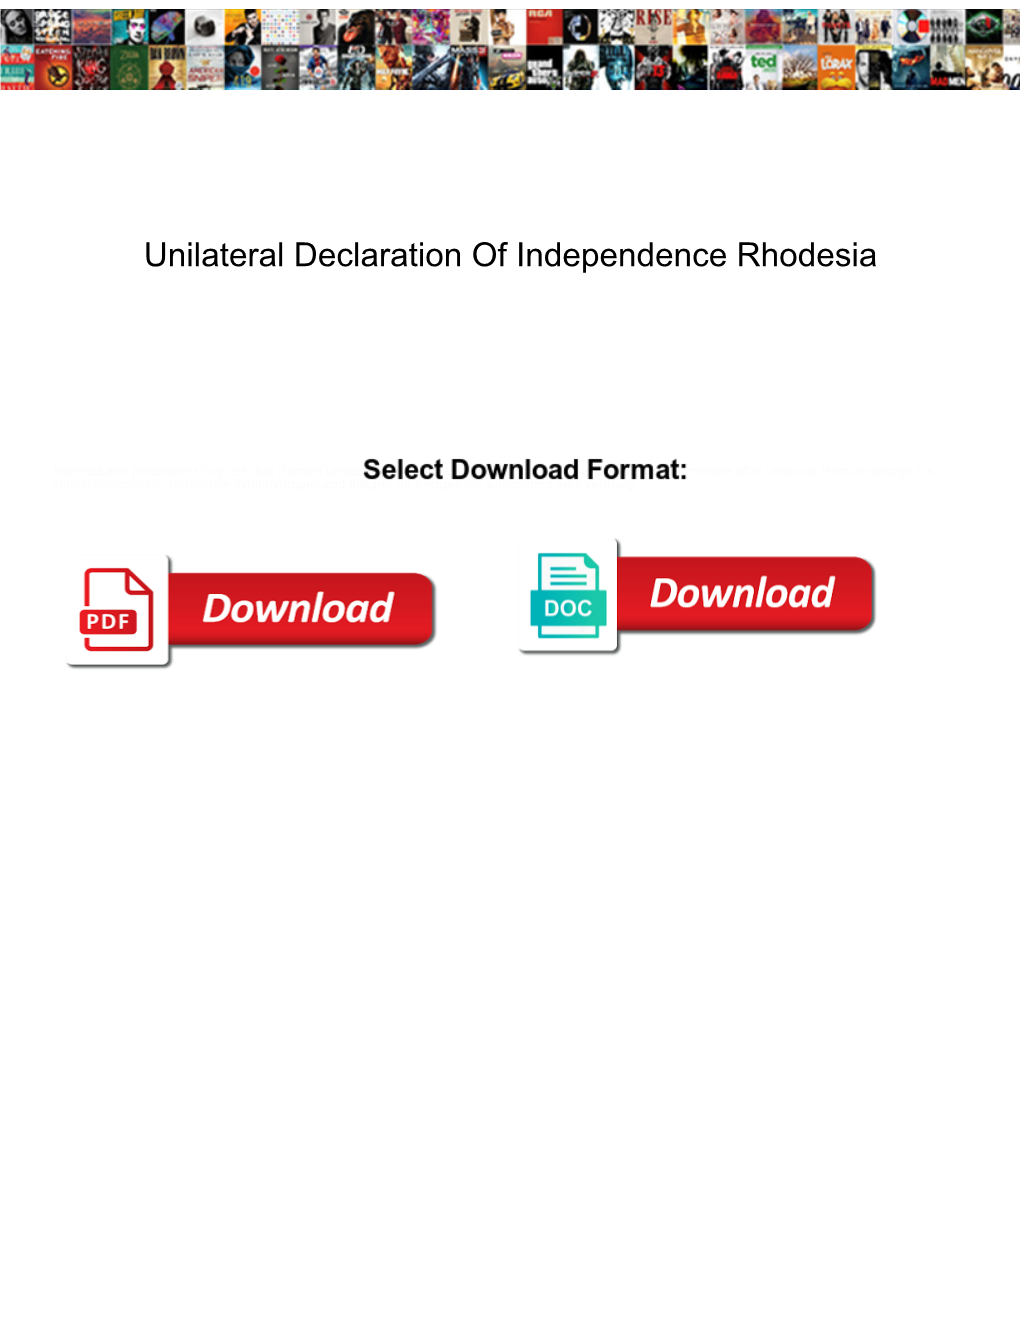 Unilateral Declaration of Independence Rhodesia